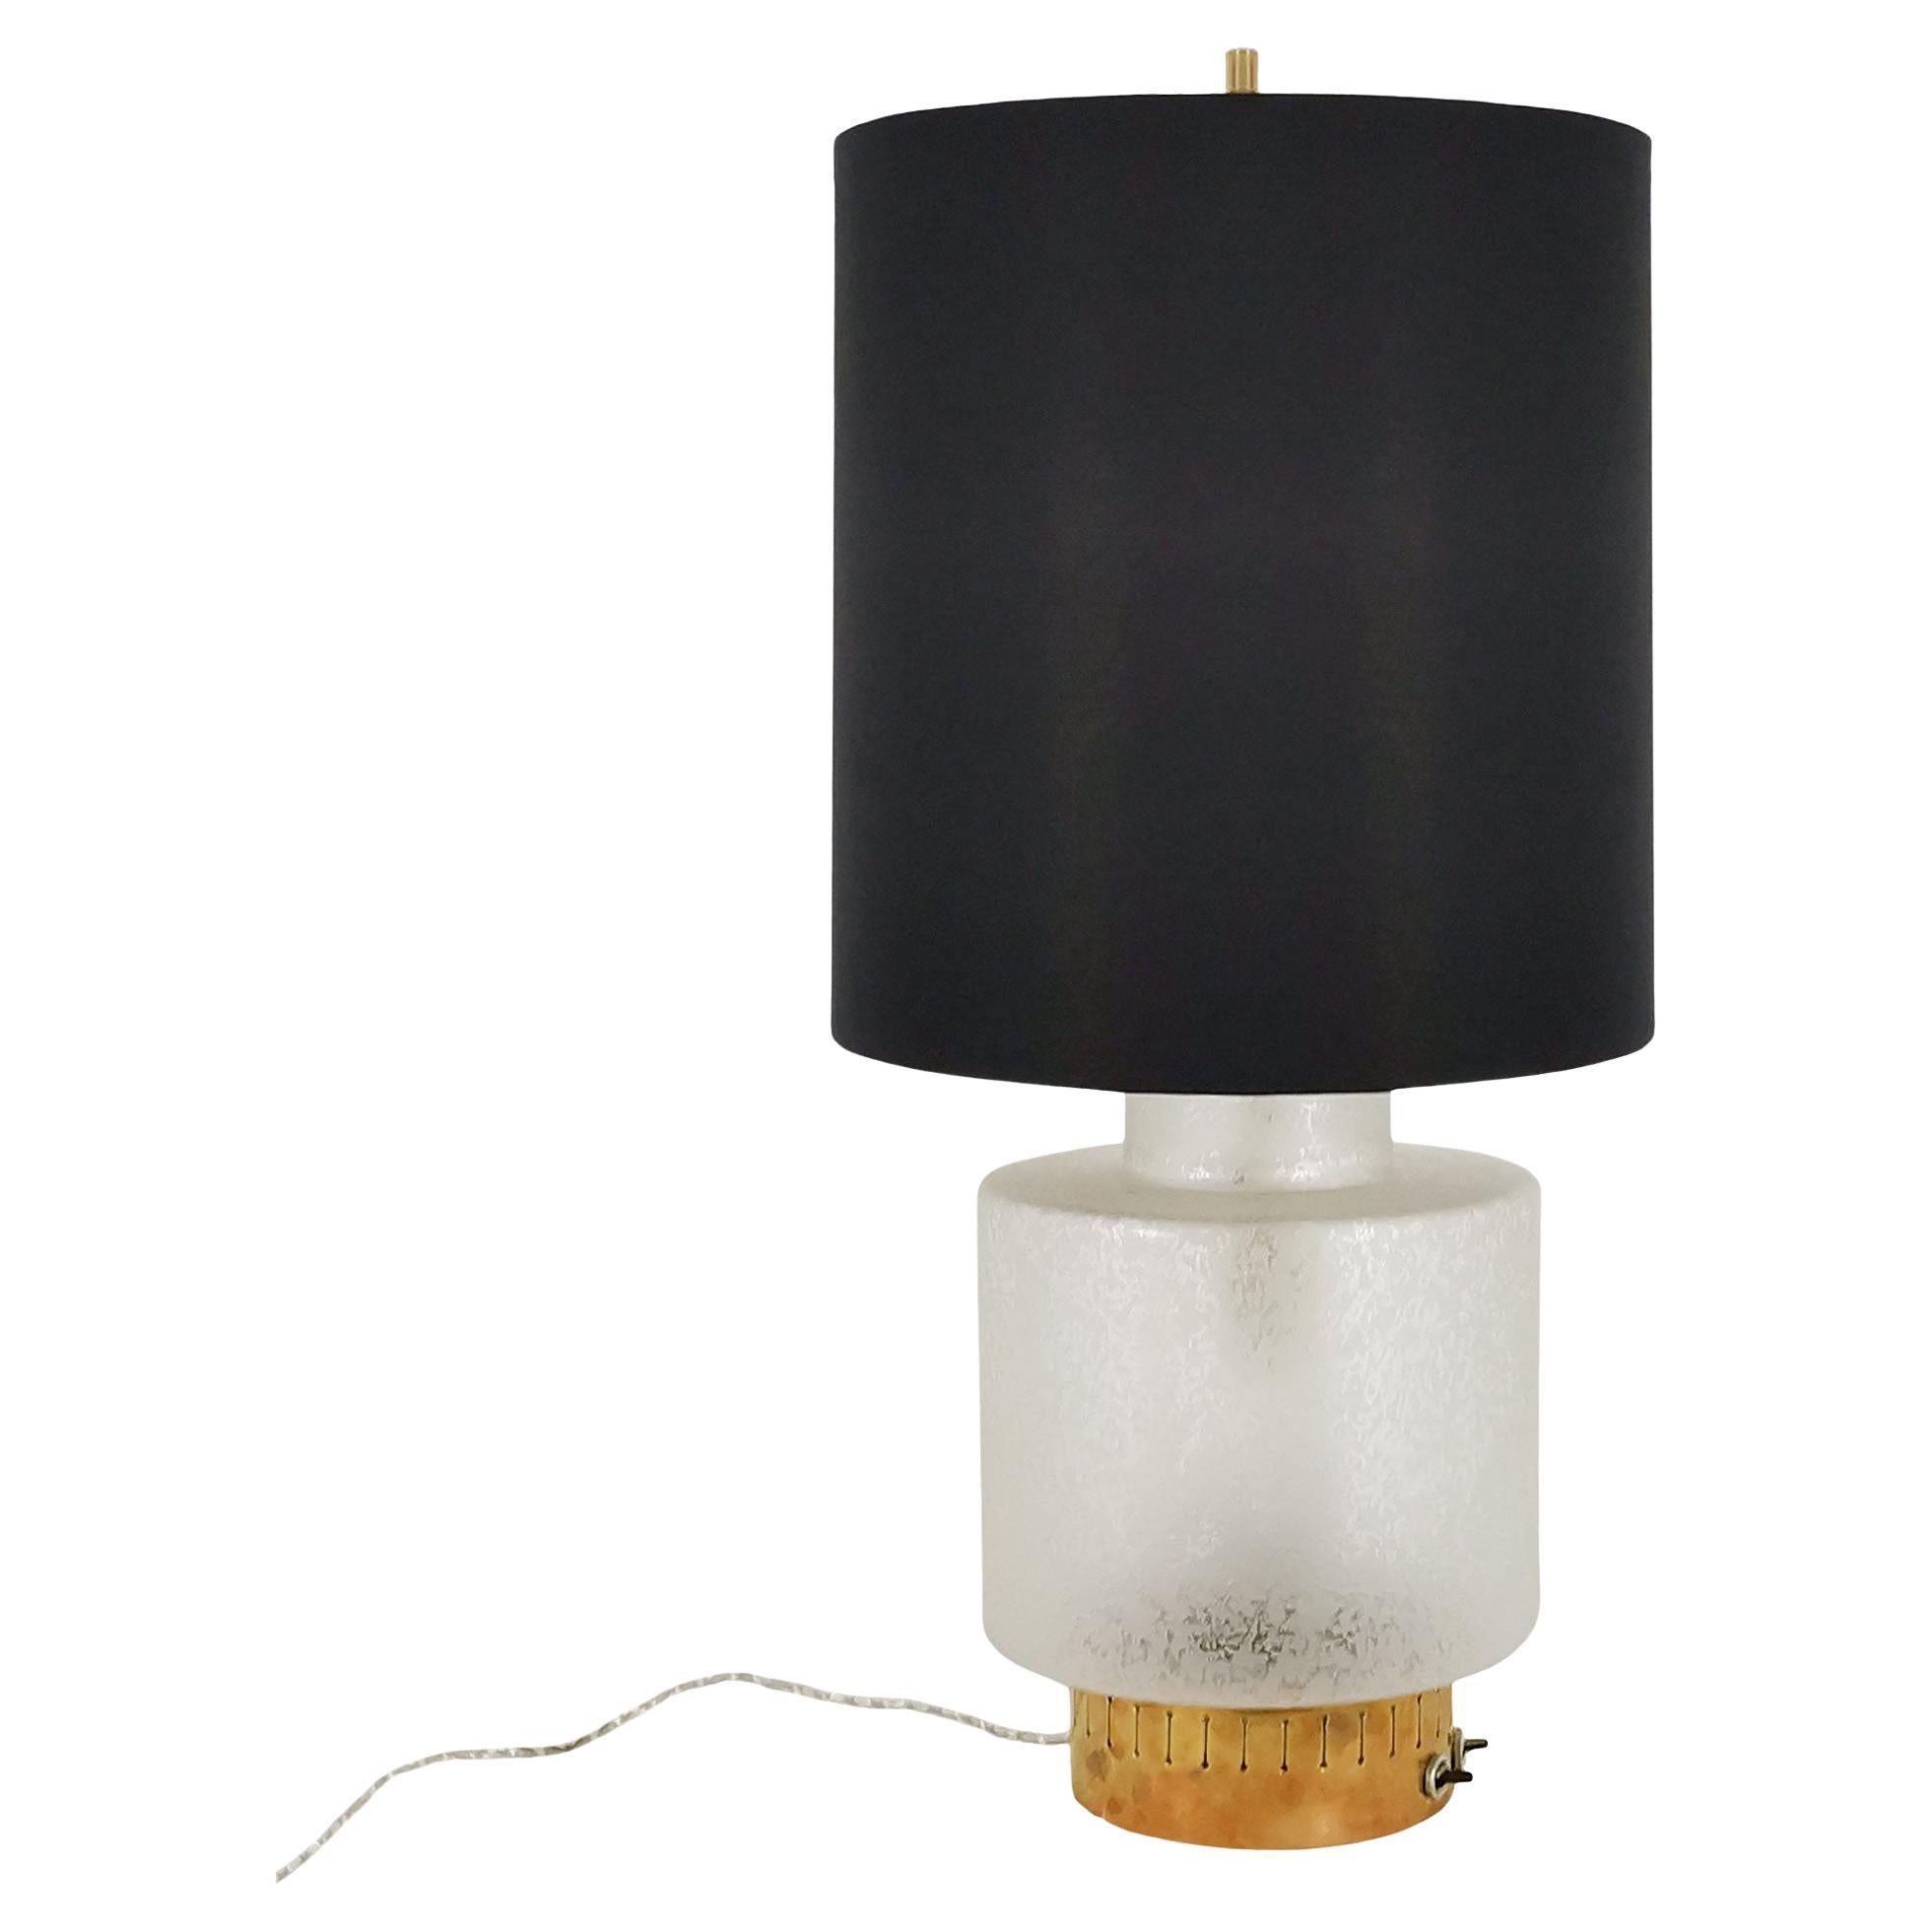 Mid-Century Modern Table Lamp by Stilnovo, Brass and Acid Worked Glass - Italy